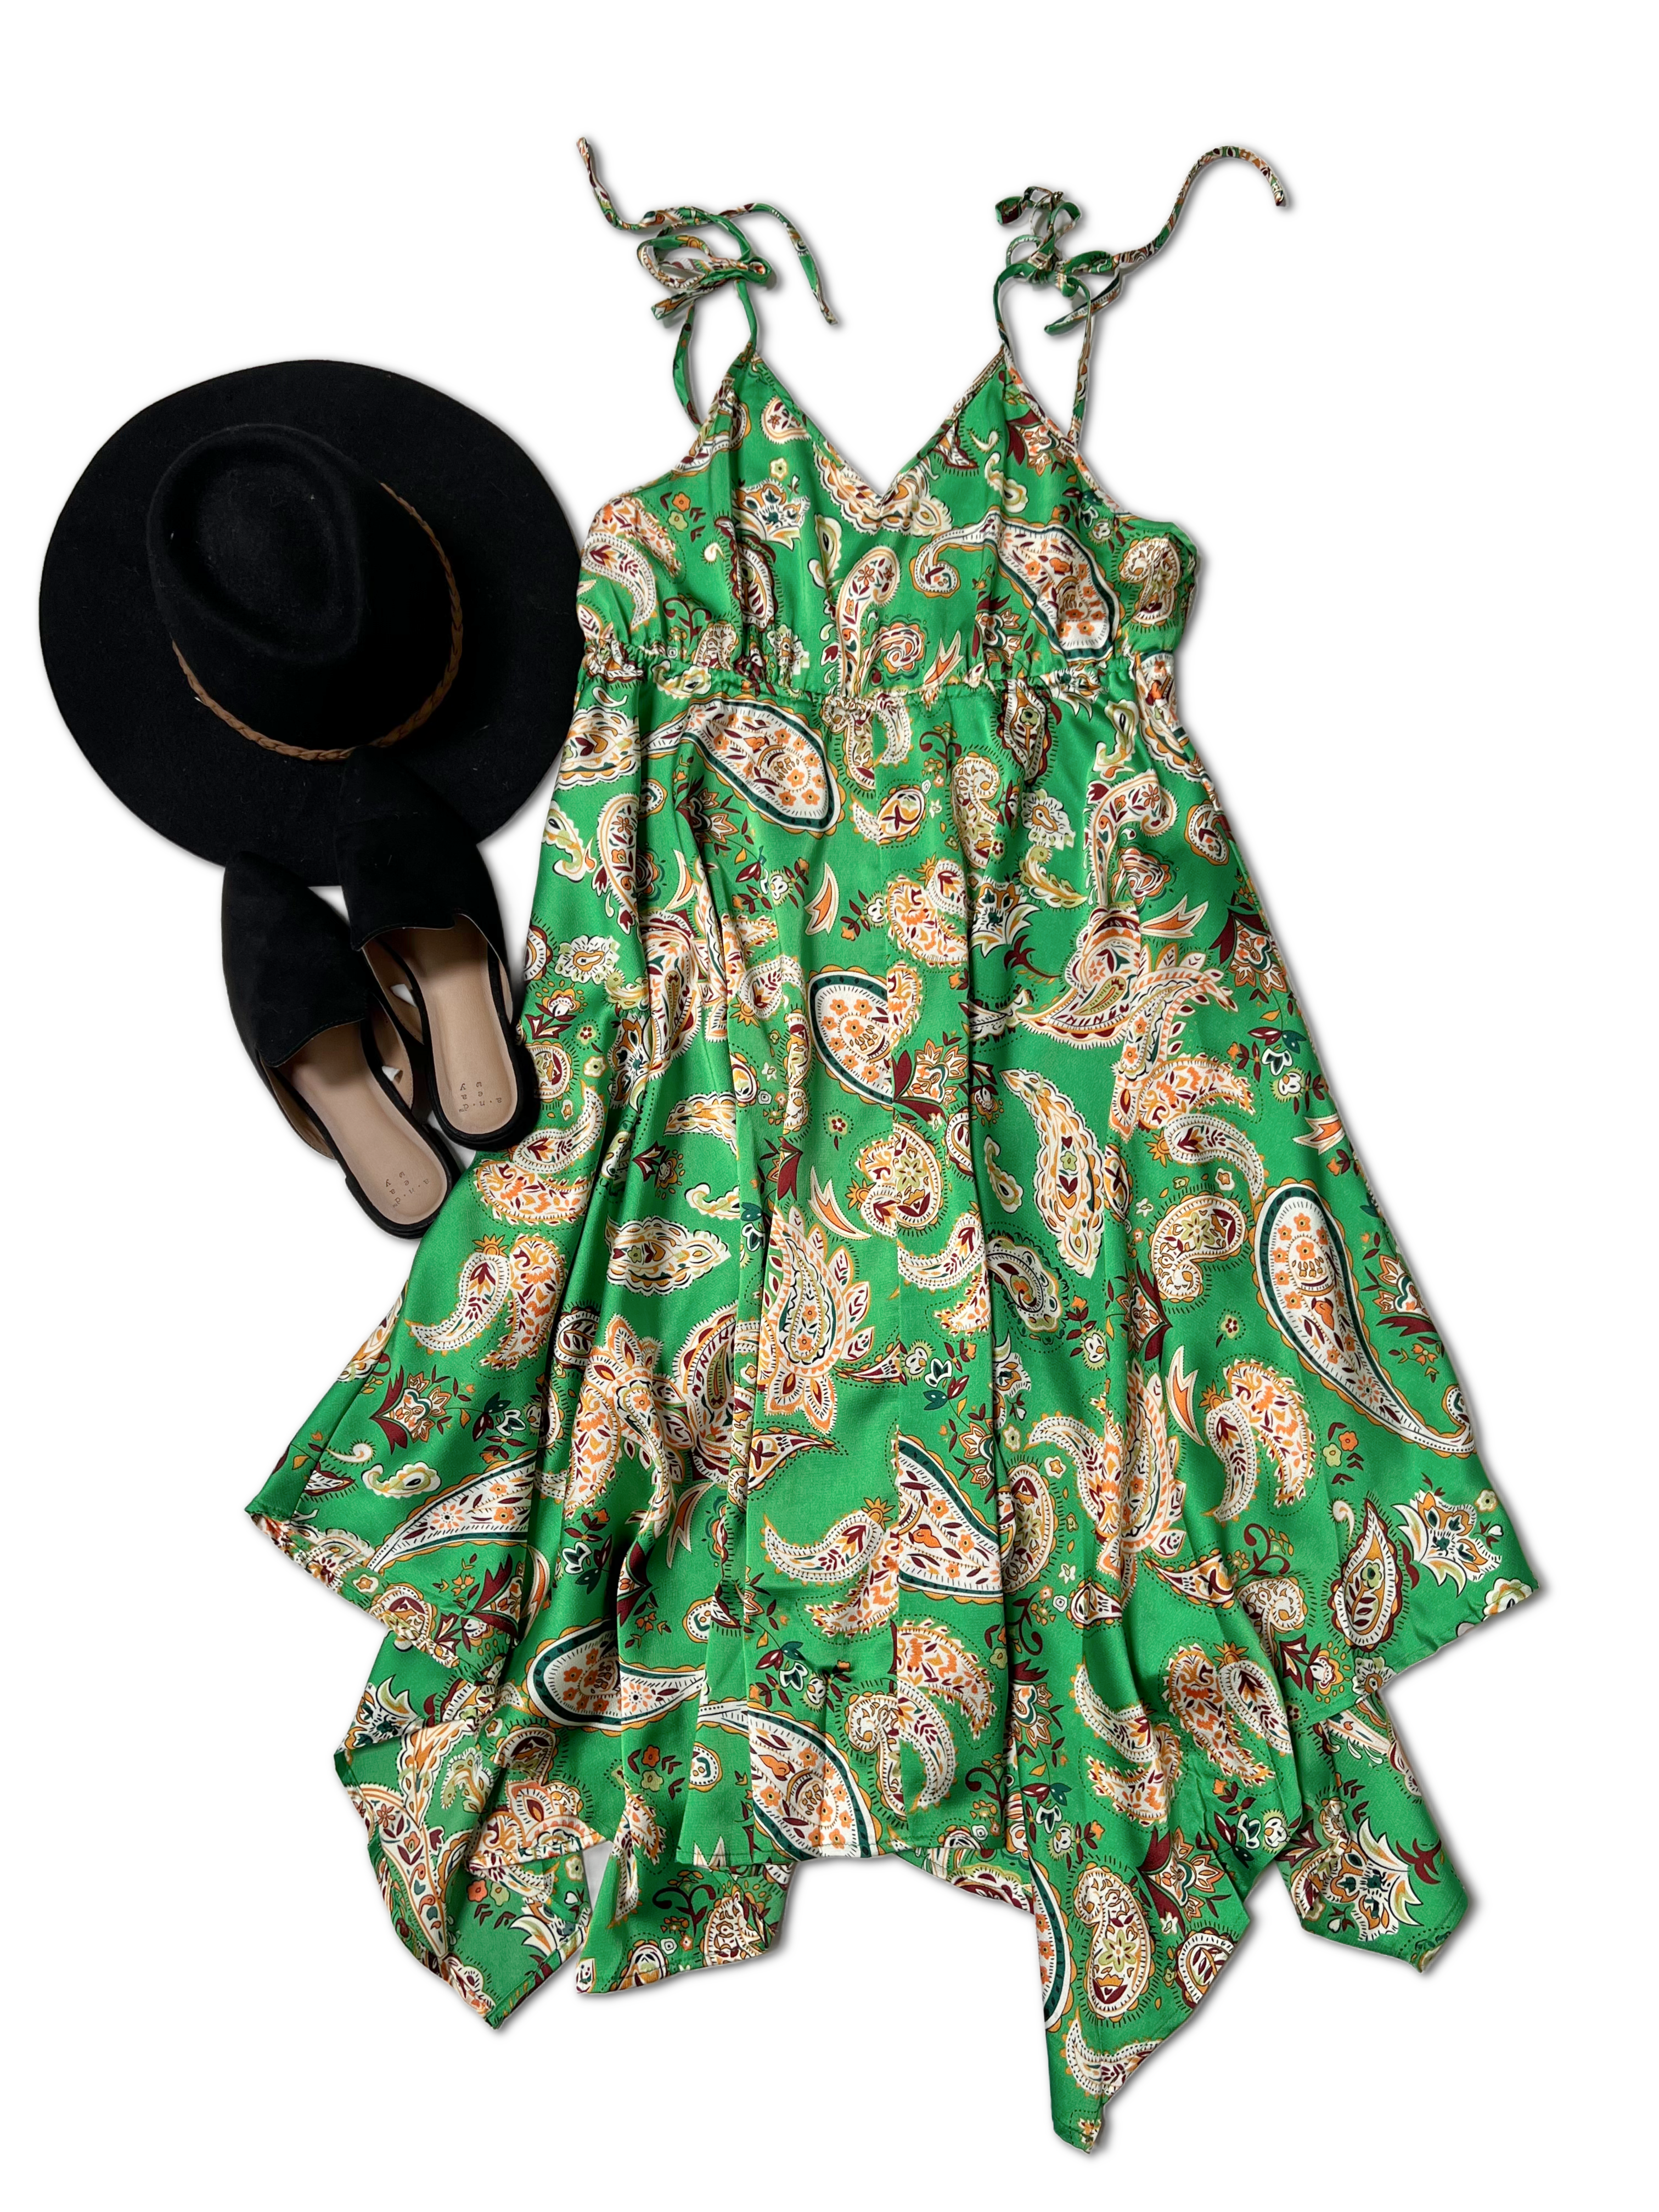 LLOVE Tallulah Paisley Dress - Green OOTD Boutique Simplified